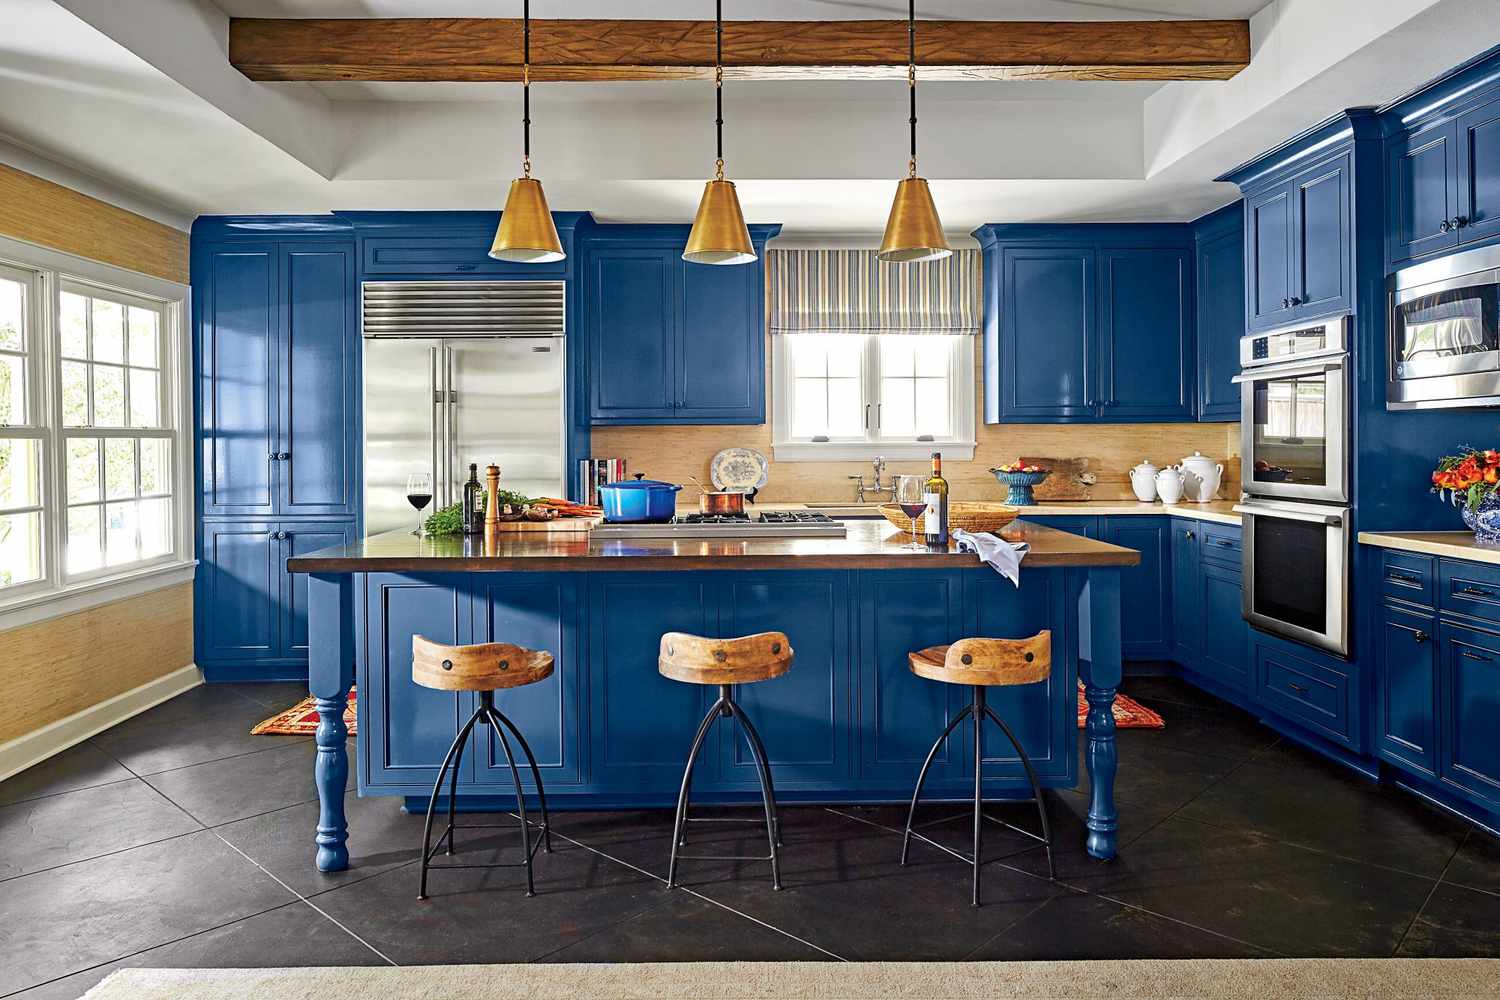 What is the best finish of paint for kitchen cabinets